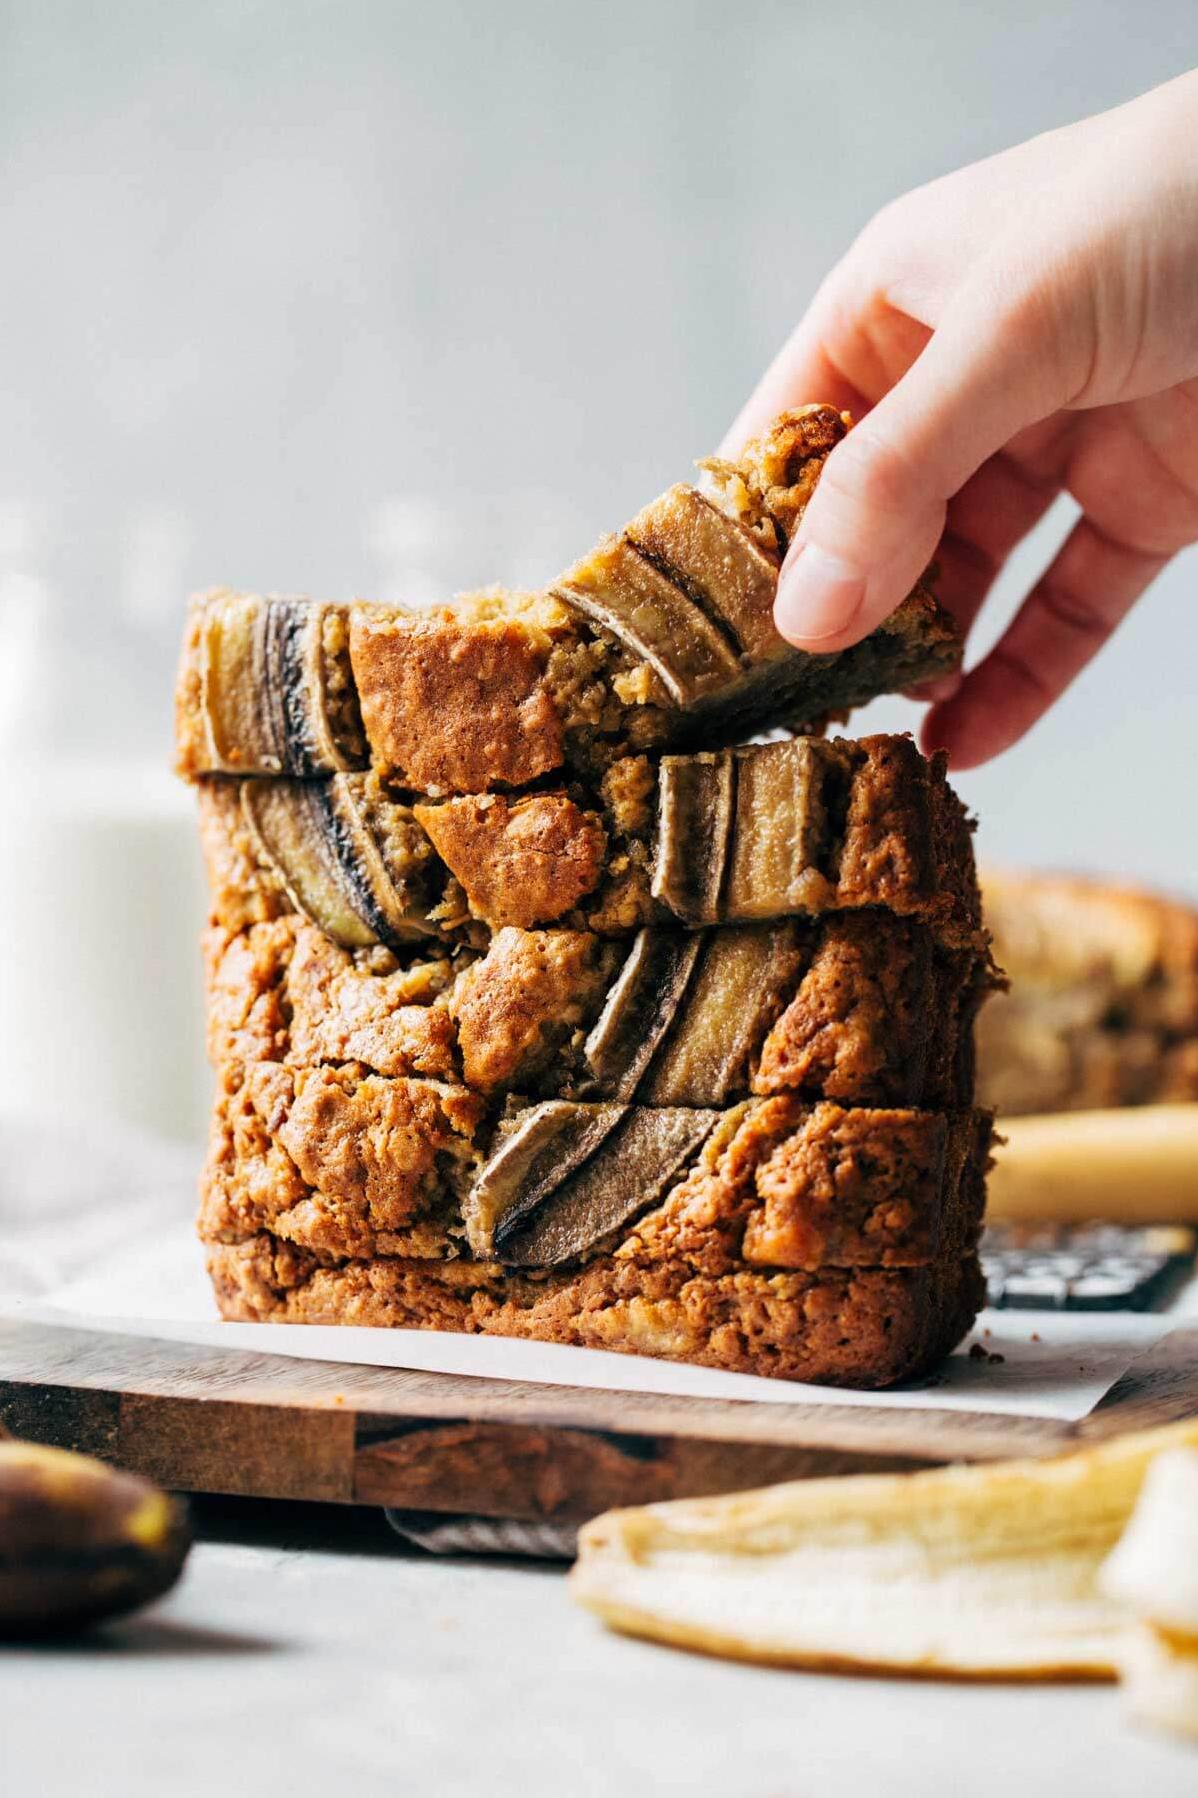  You won't even know this banana bread is gluten-free!